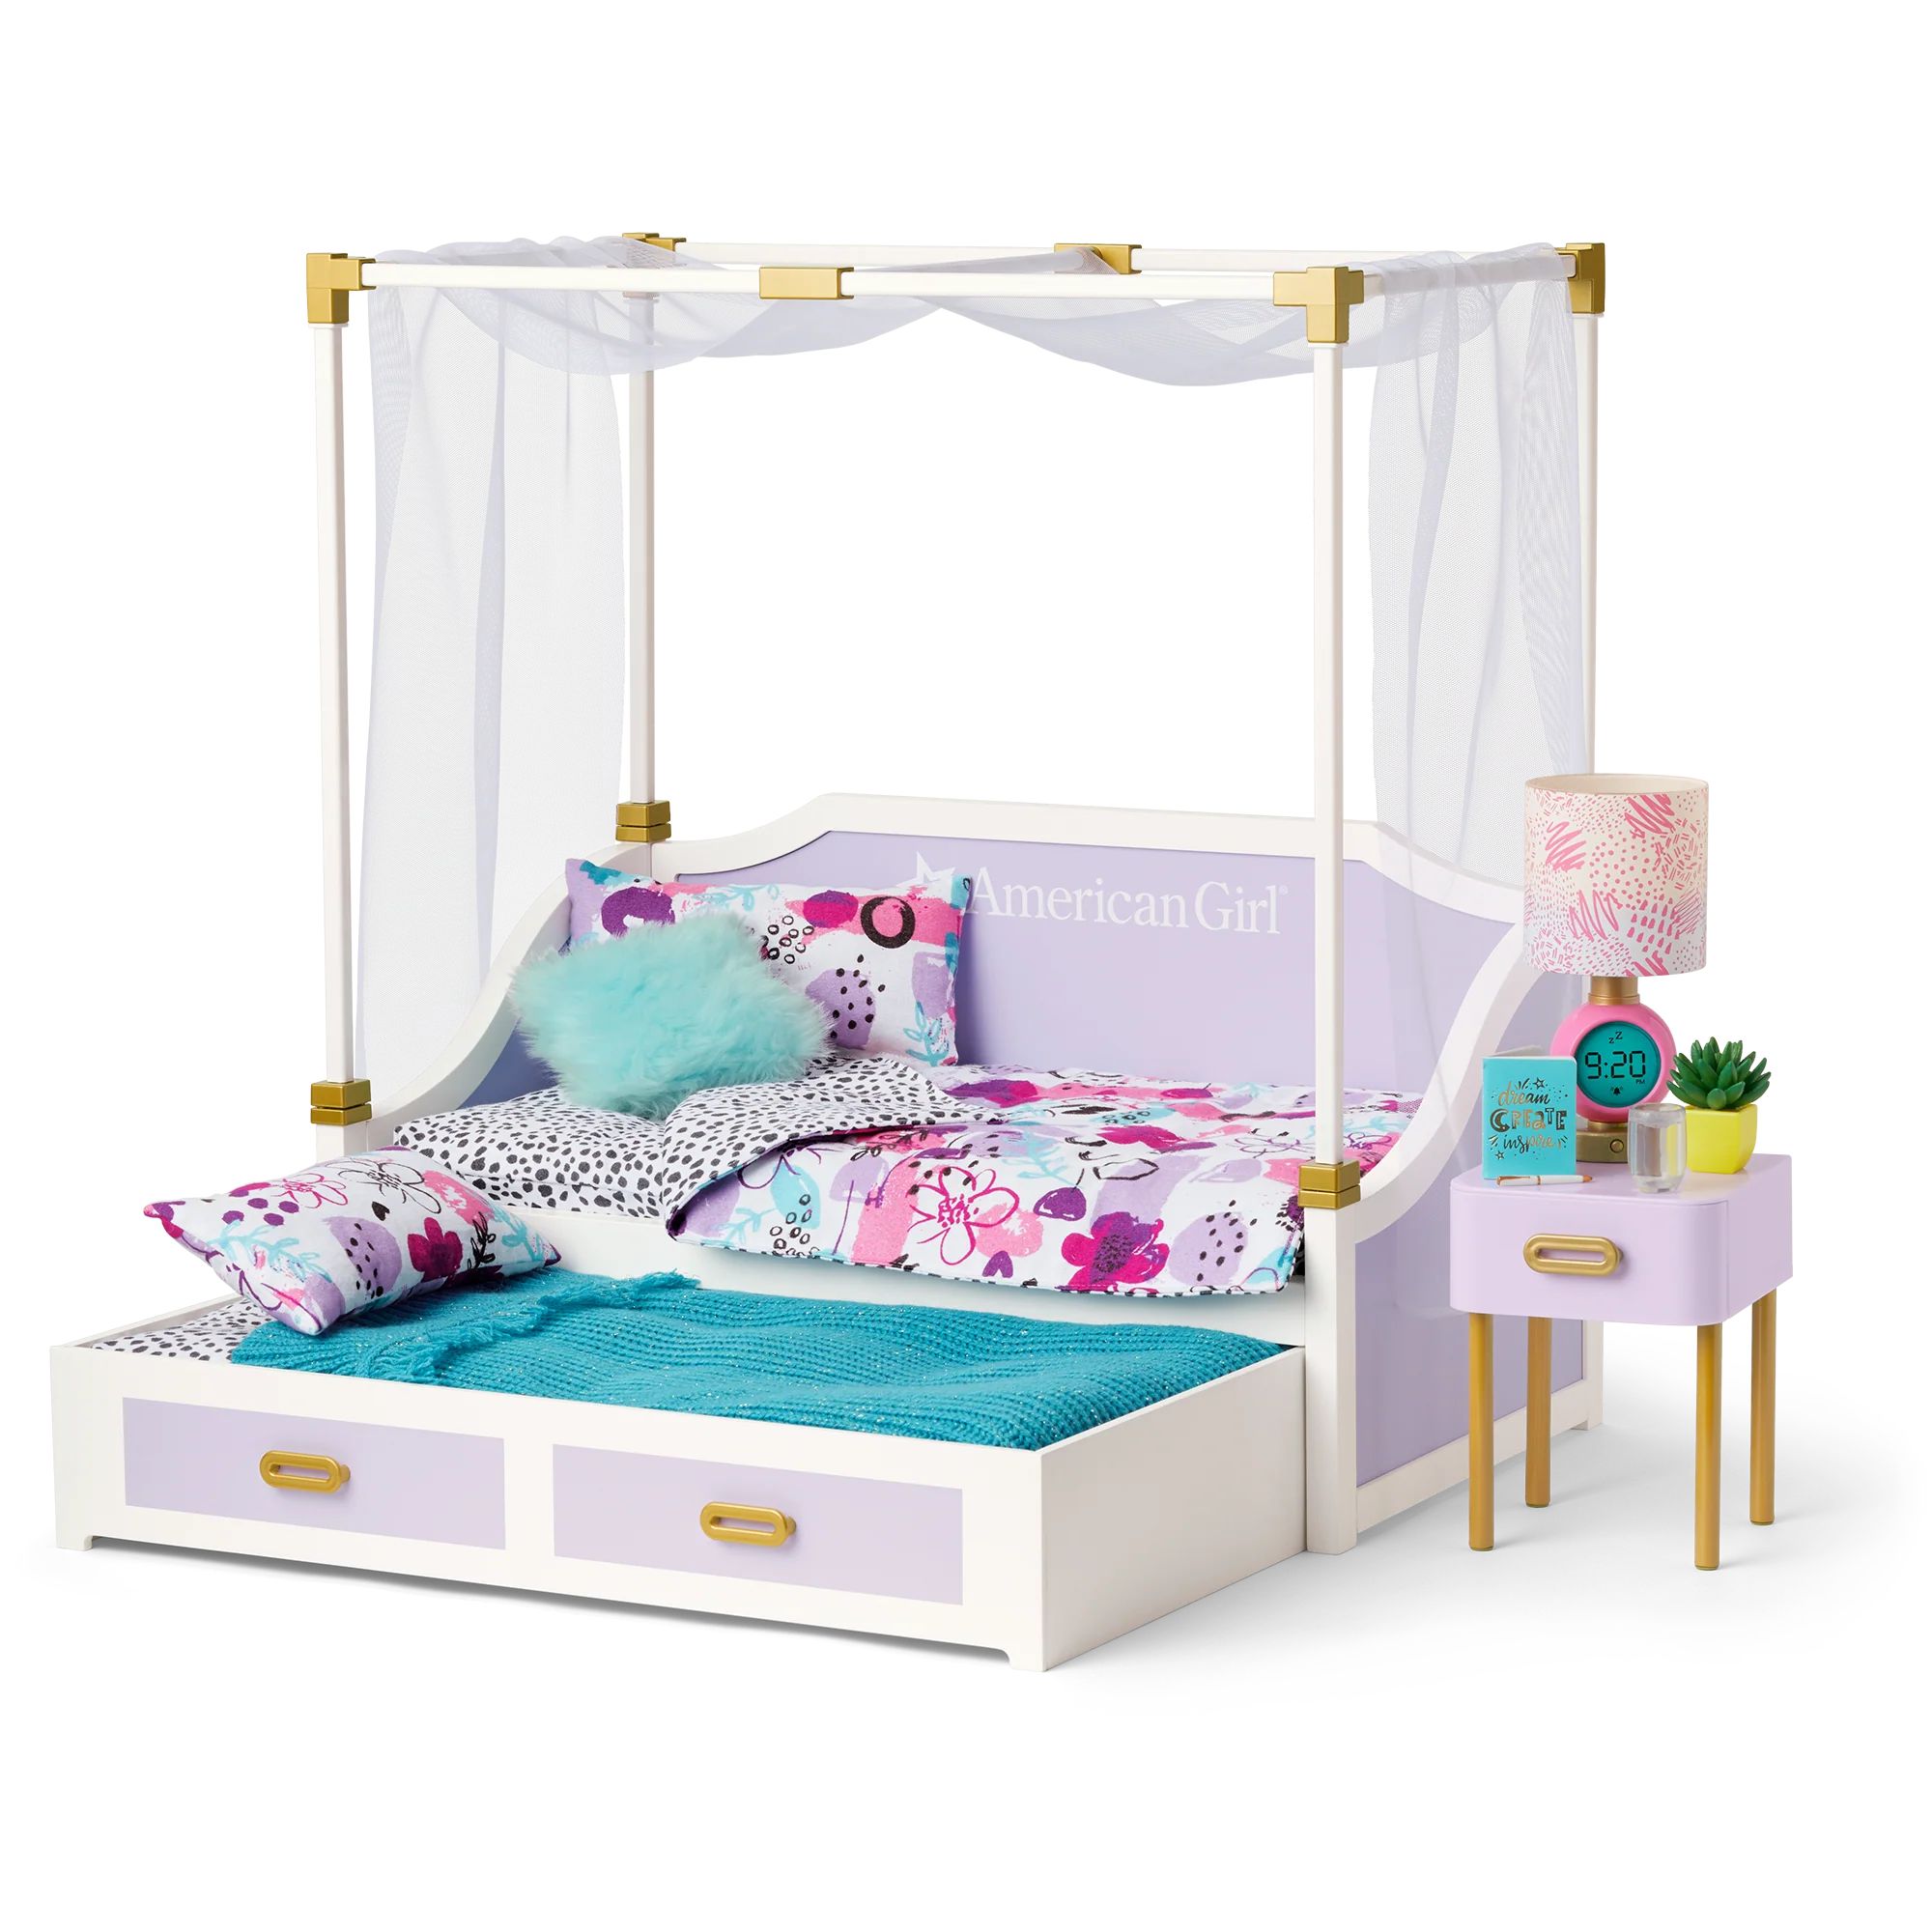 Room for Two Trundle Bed & Nightstand | American Girl